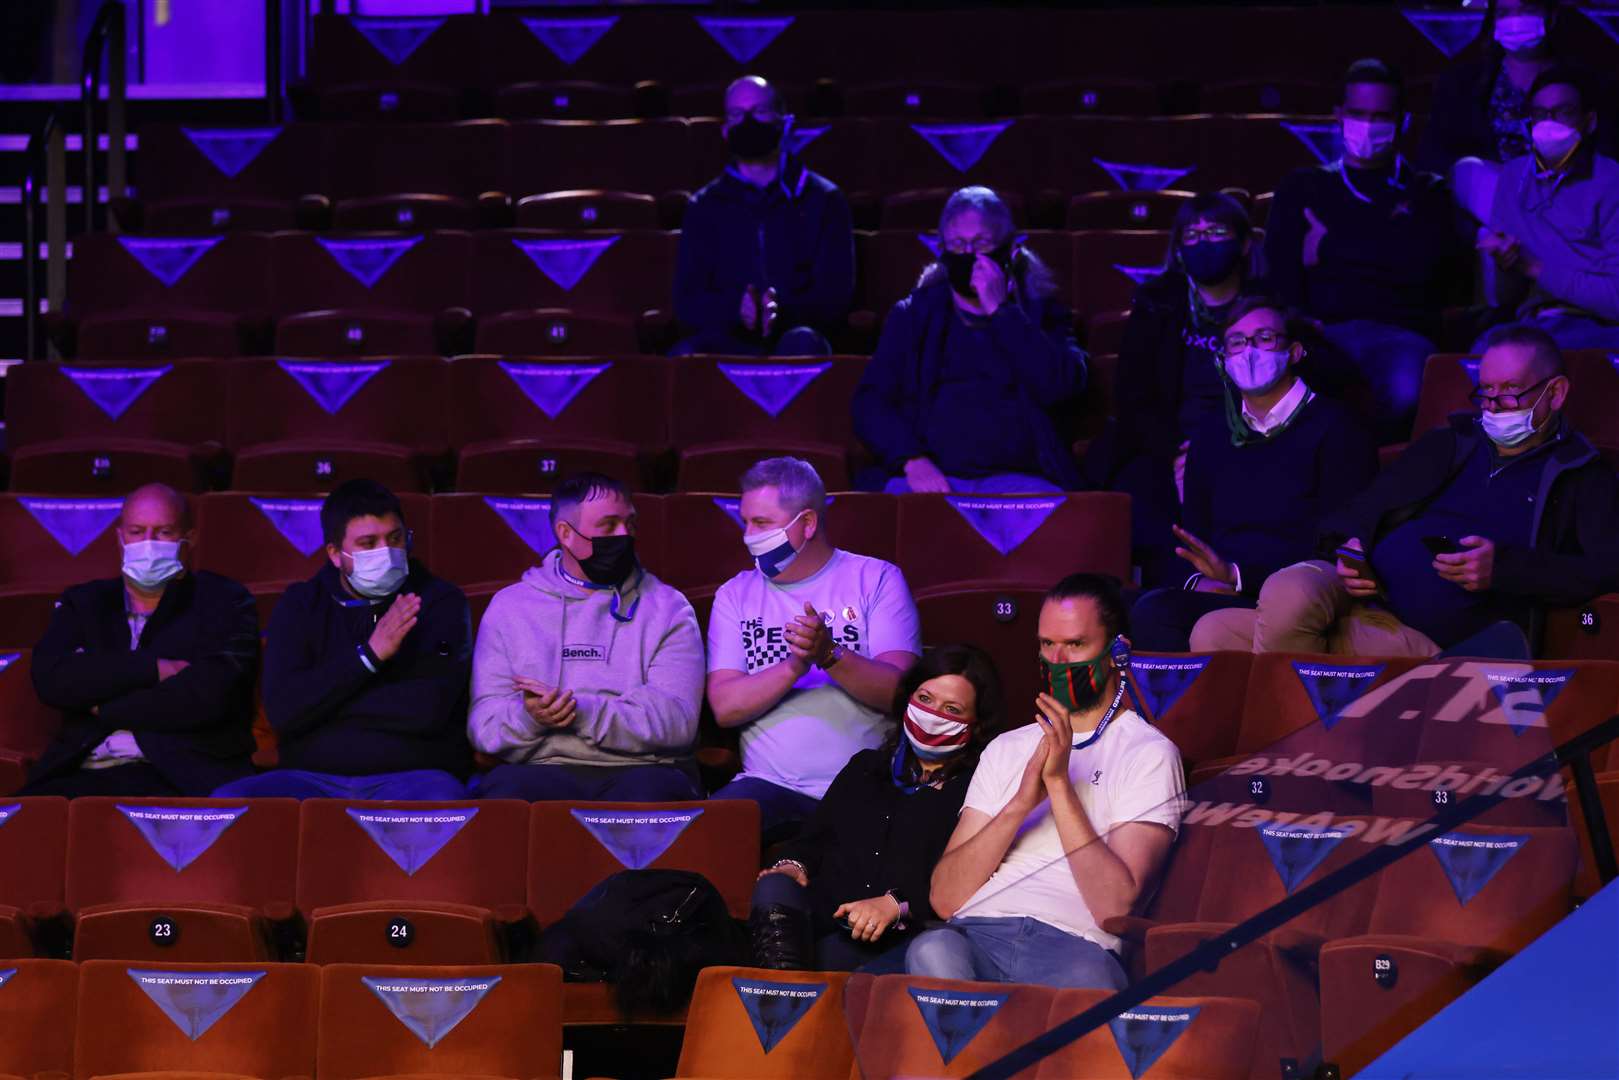 Spectators wearing face masks applaud during the Betfred World Snooker Championships (George Wood/PA)